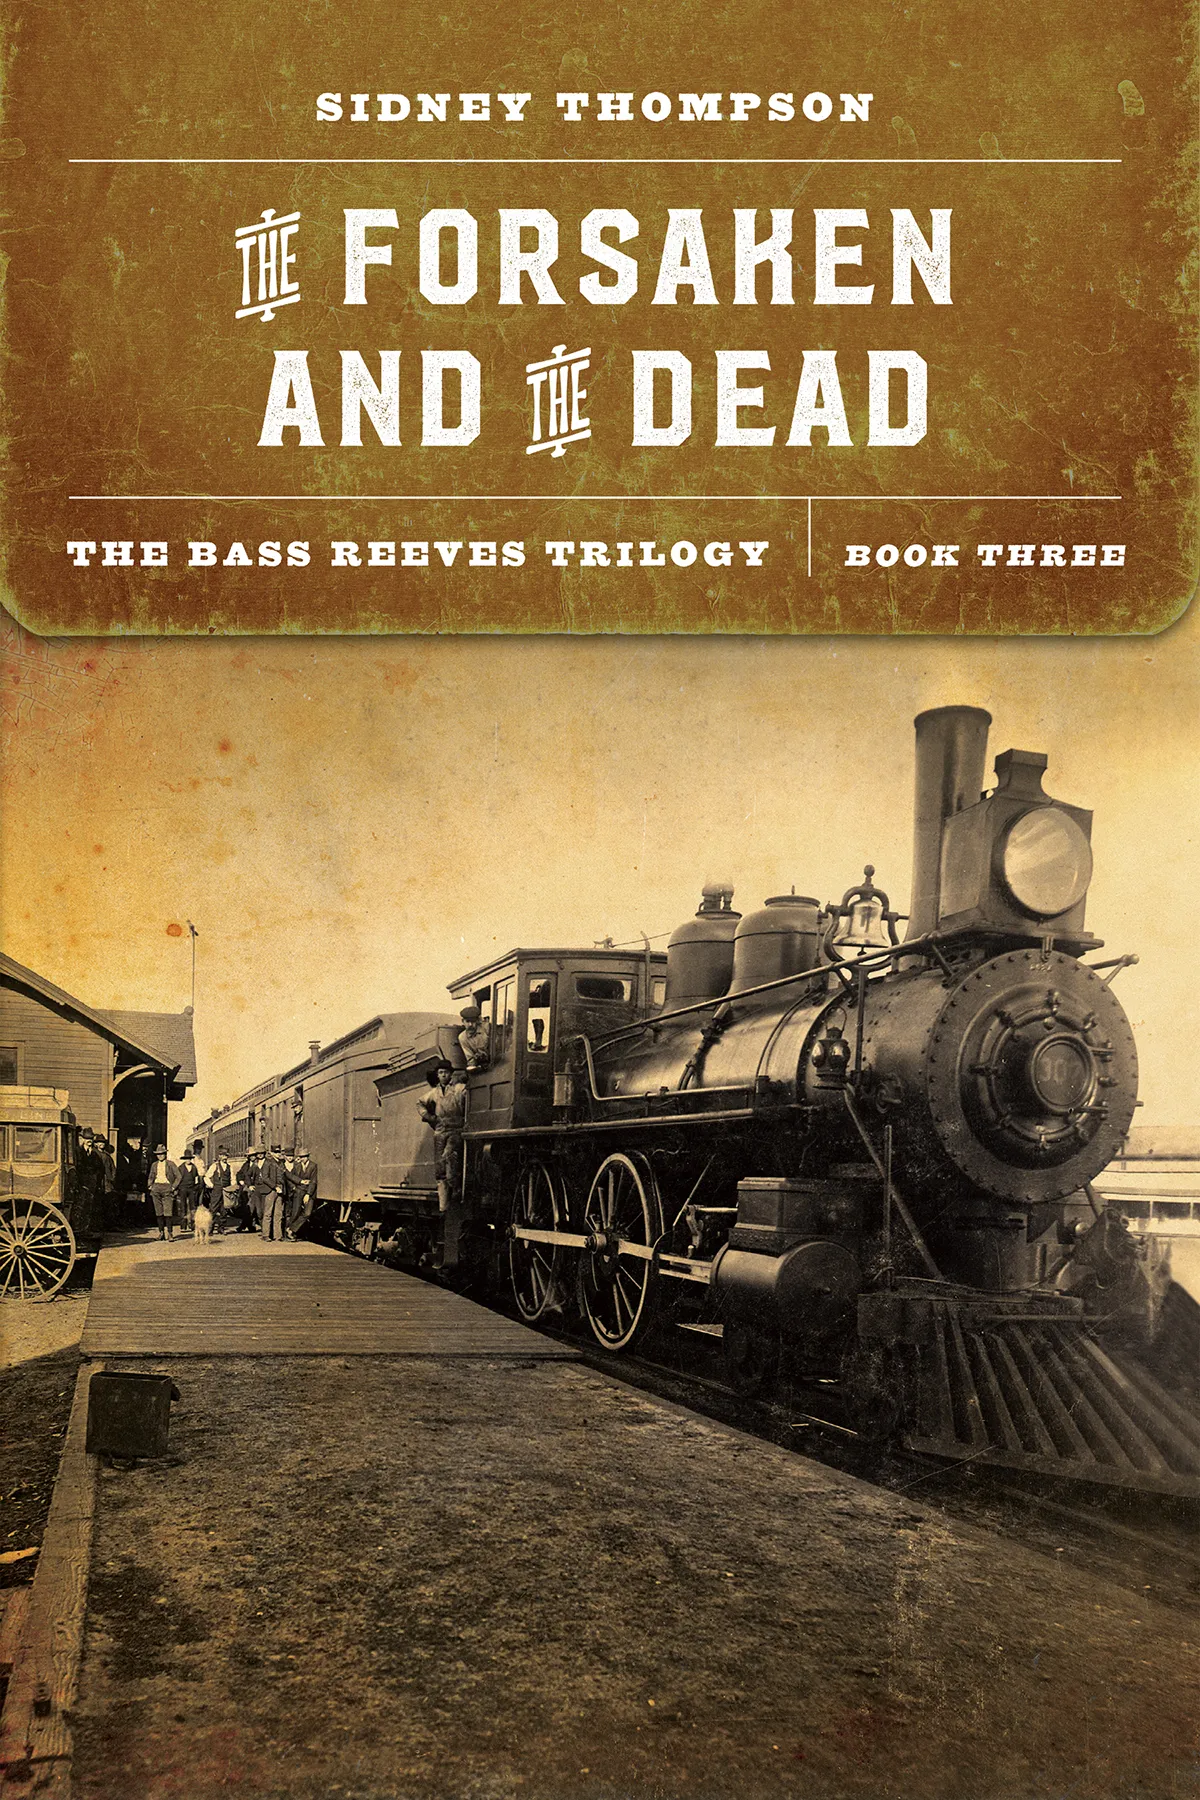 The Forsaken and the Dead (The Bass Reeves Trilogy #3)